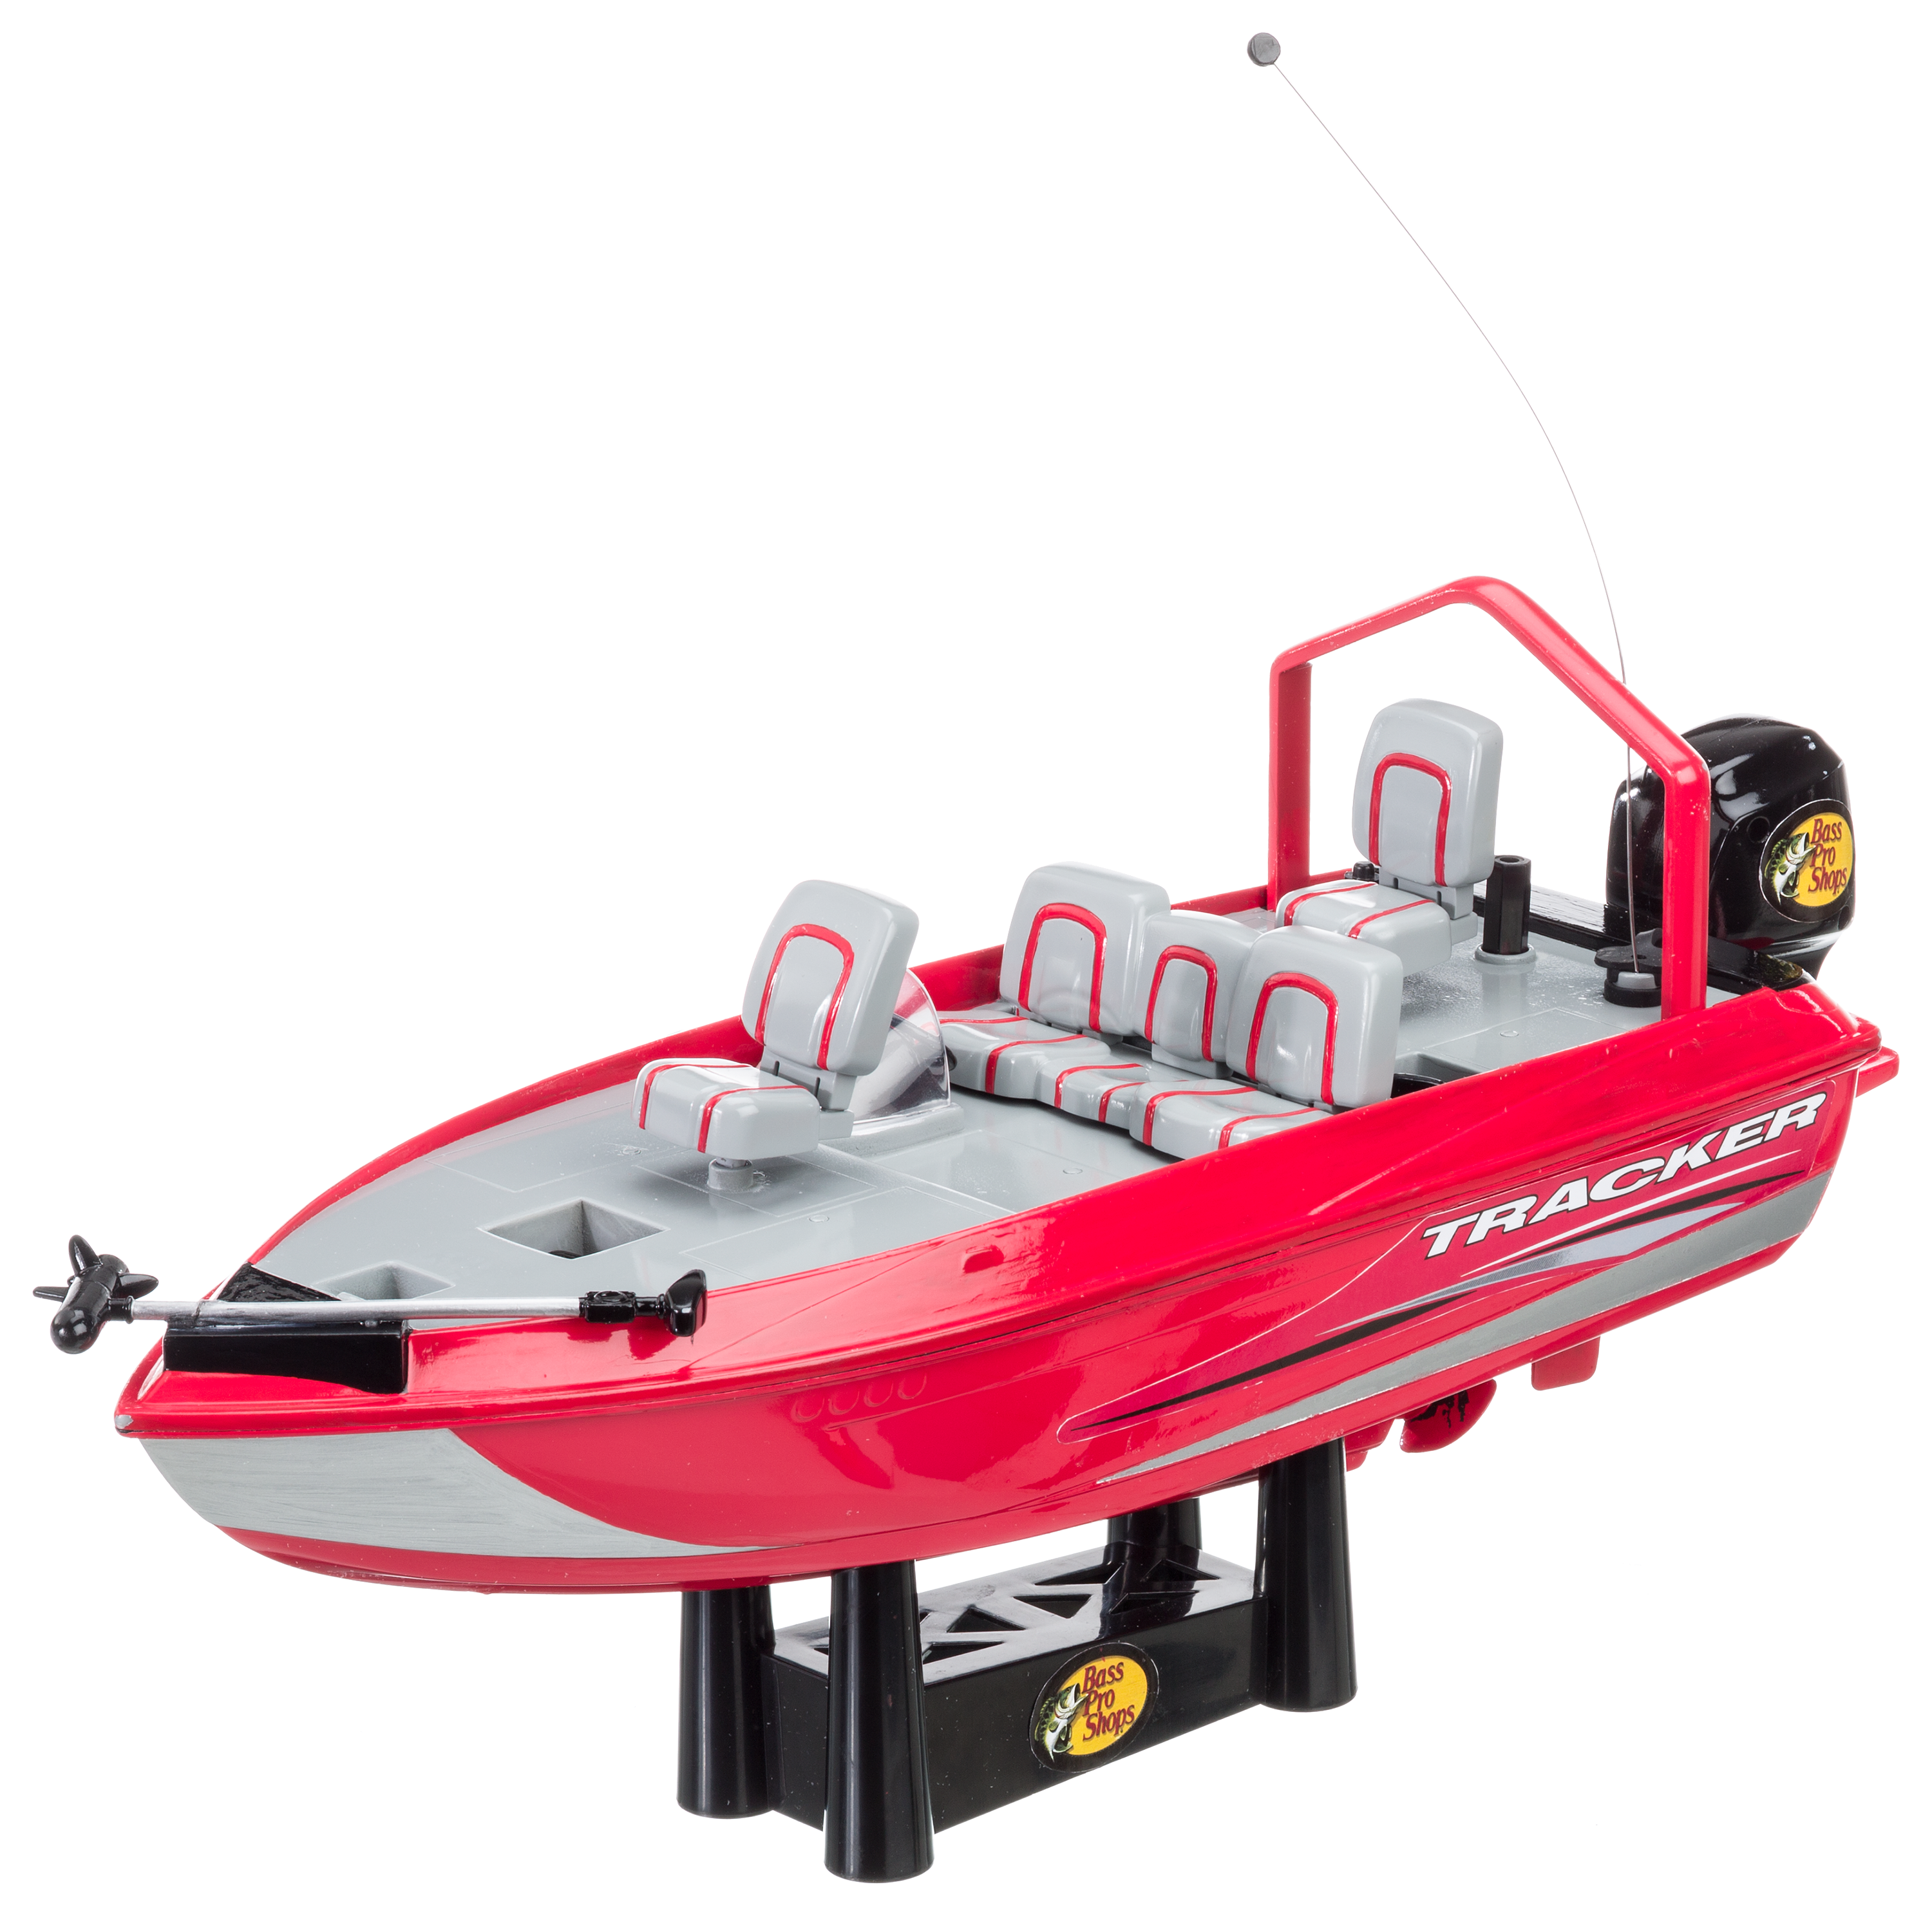 Bass Pro Shops Tracker Remote Control Fishing Boat Bass Pro, 52% OFF